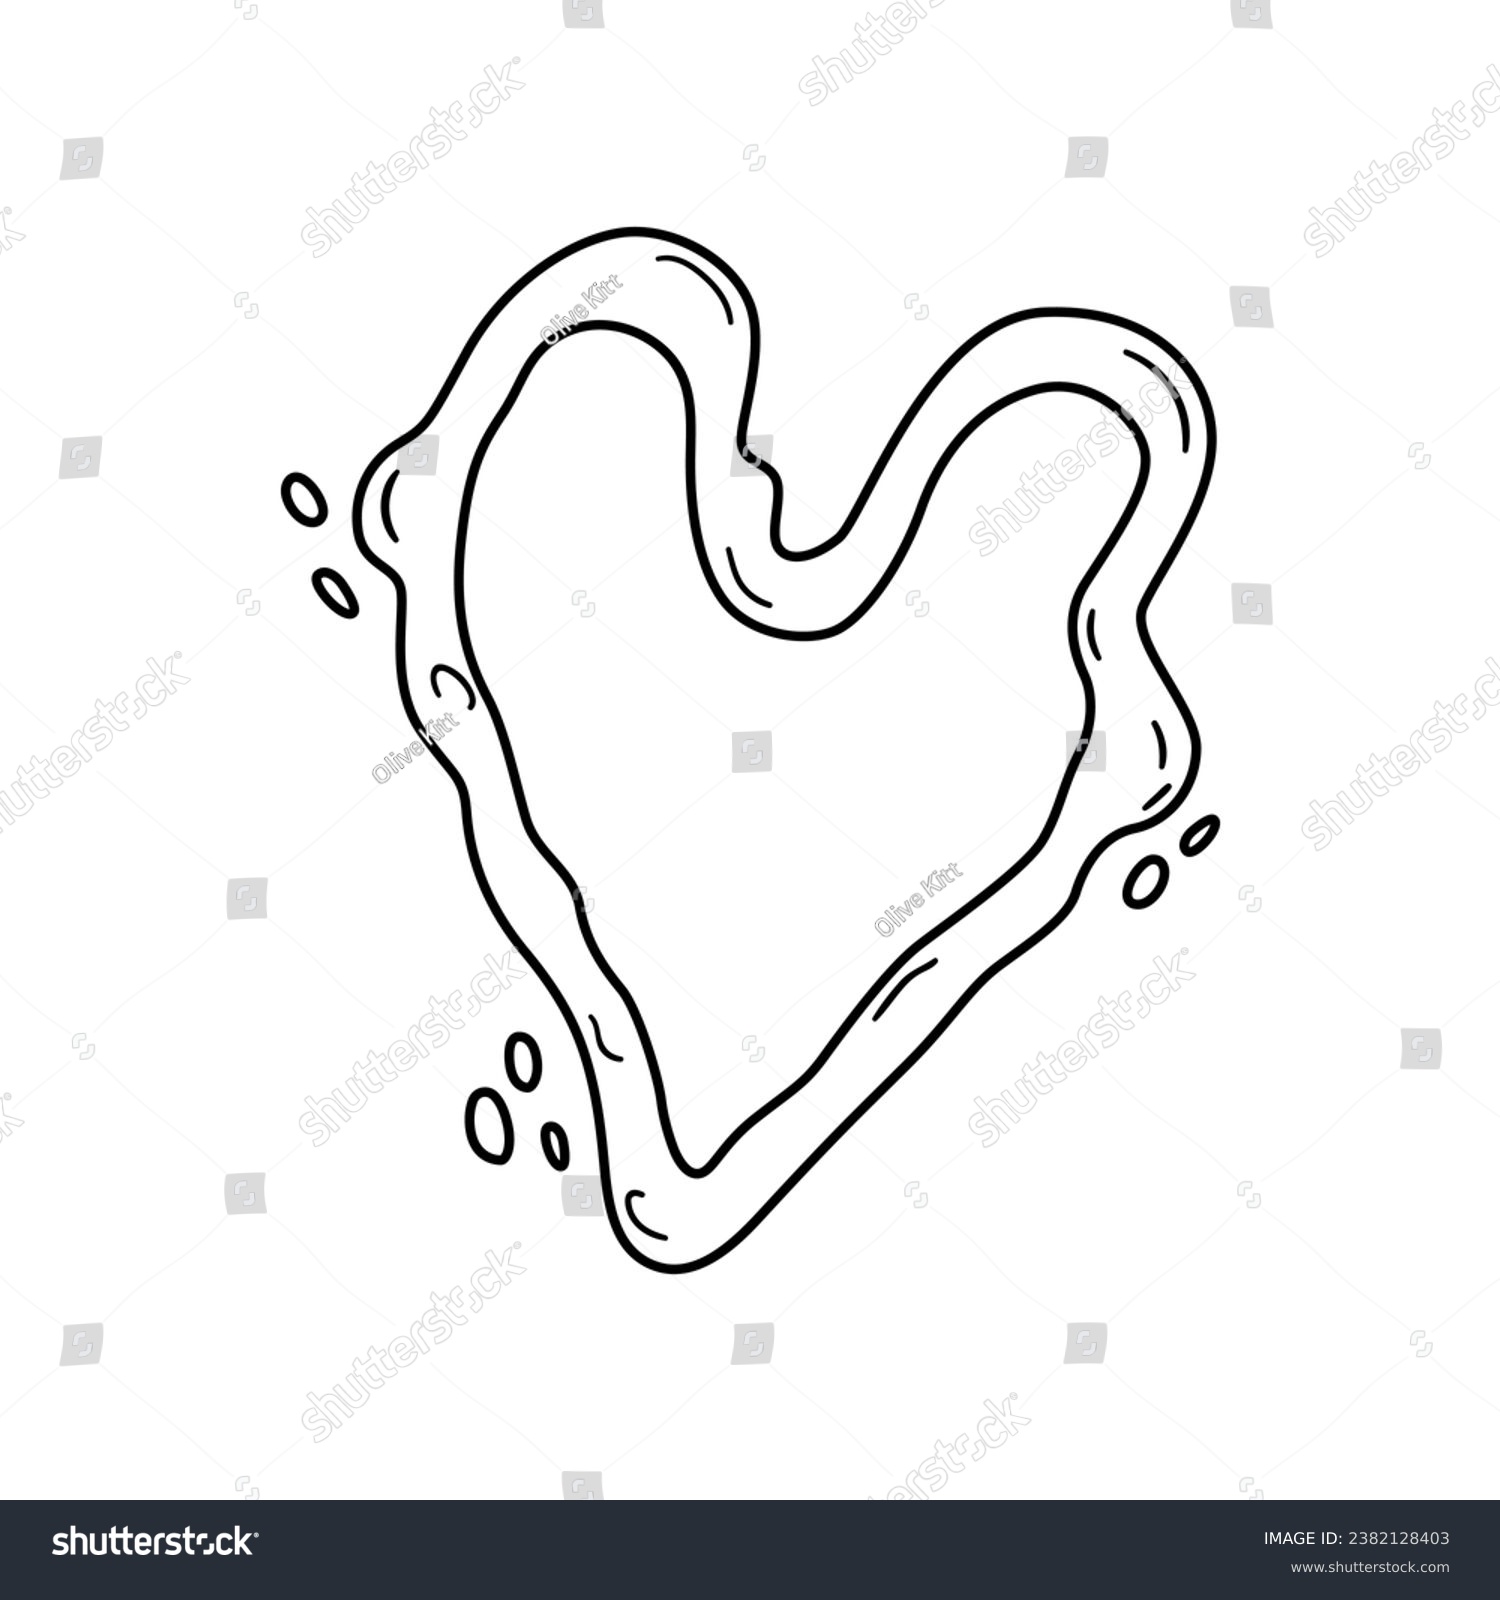 SVG of Sketch drawing of distorted heart. Outline liquid heart icon. Abstract love symbol with bubbles. Hand drawn vector illustration. svg